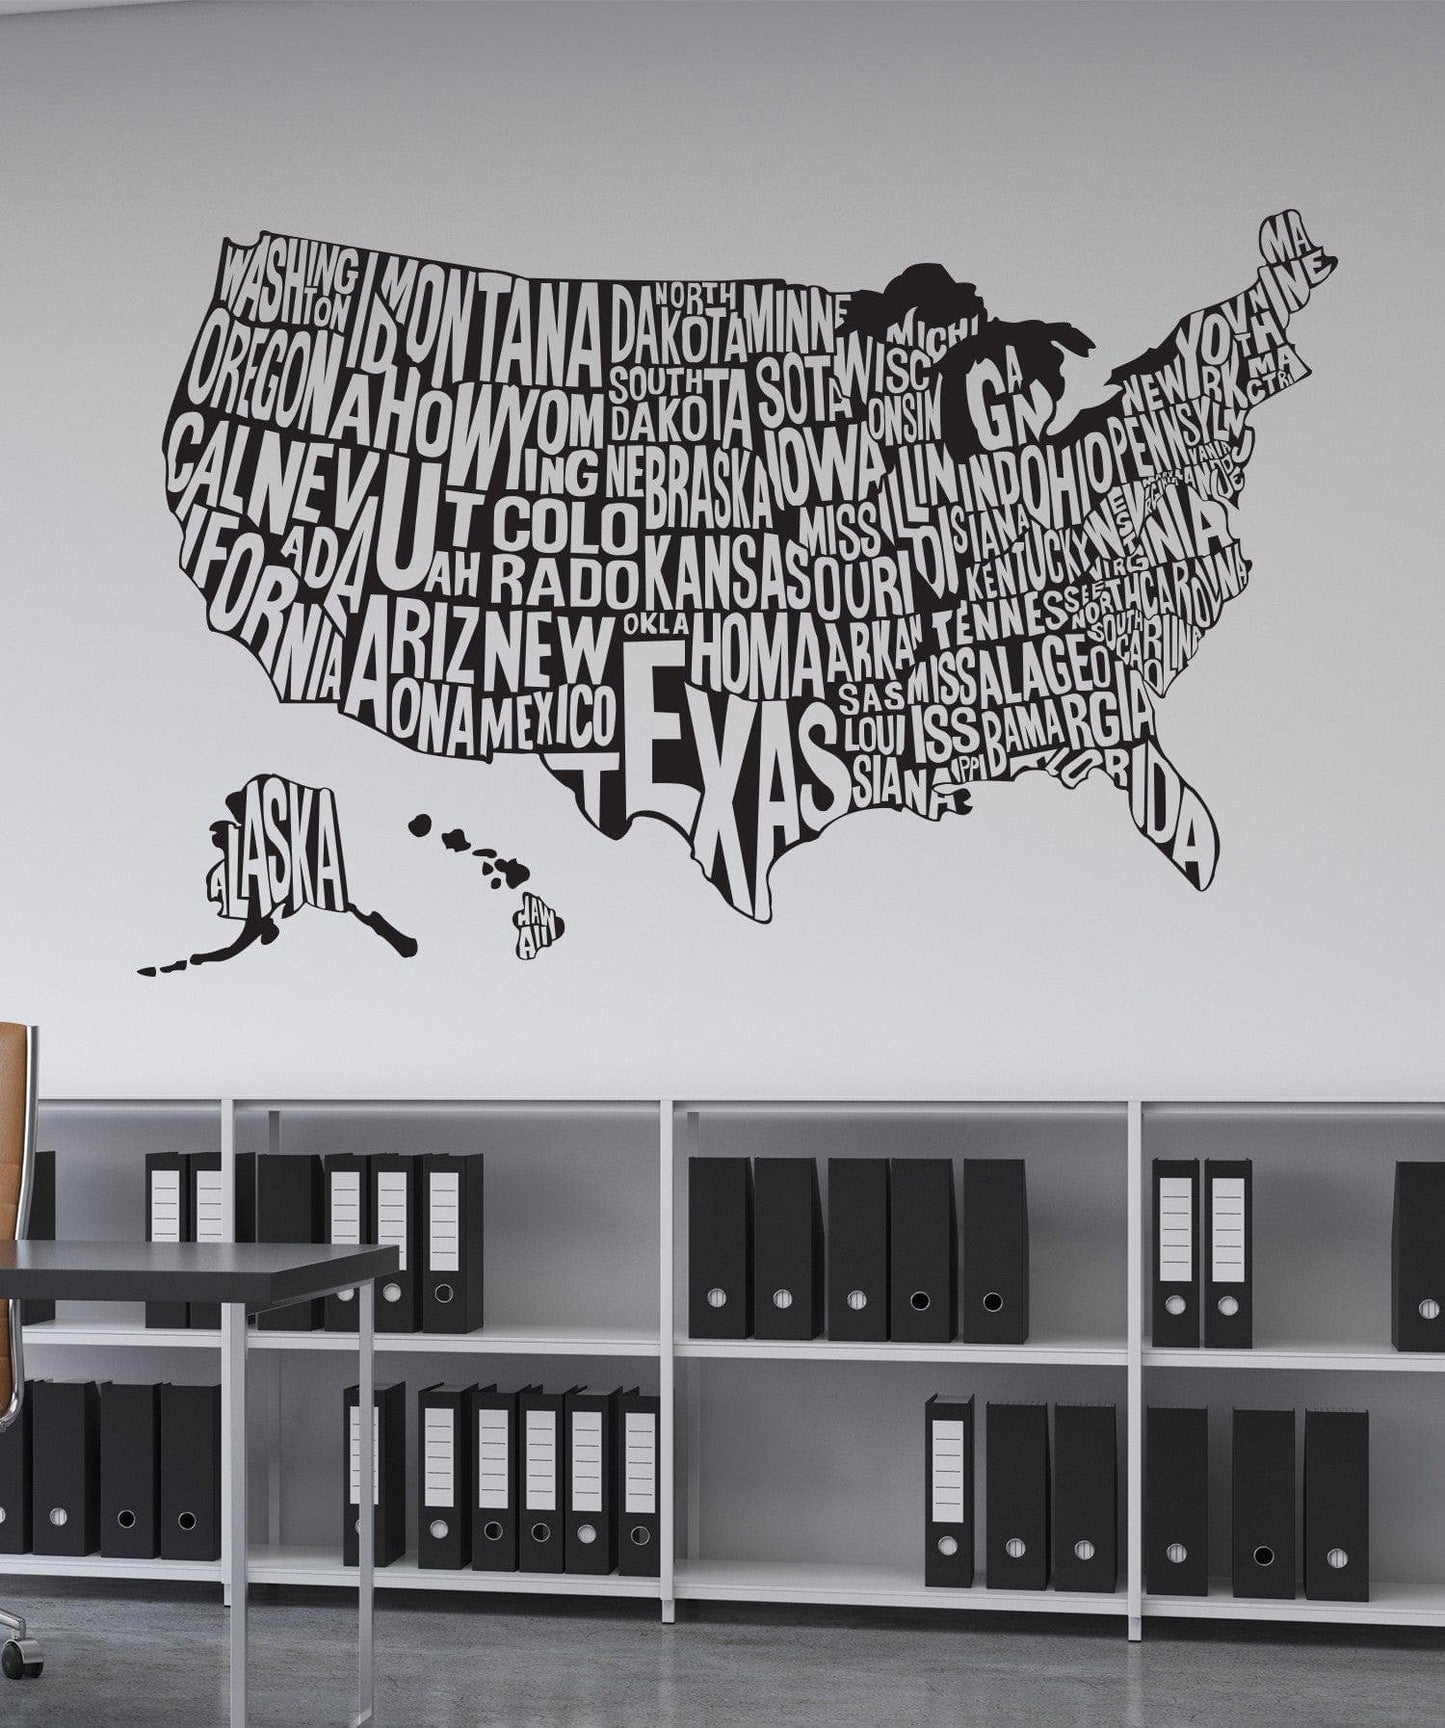 United States of America Map Vinyl Wall Decal Sticker. #1275